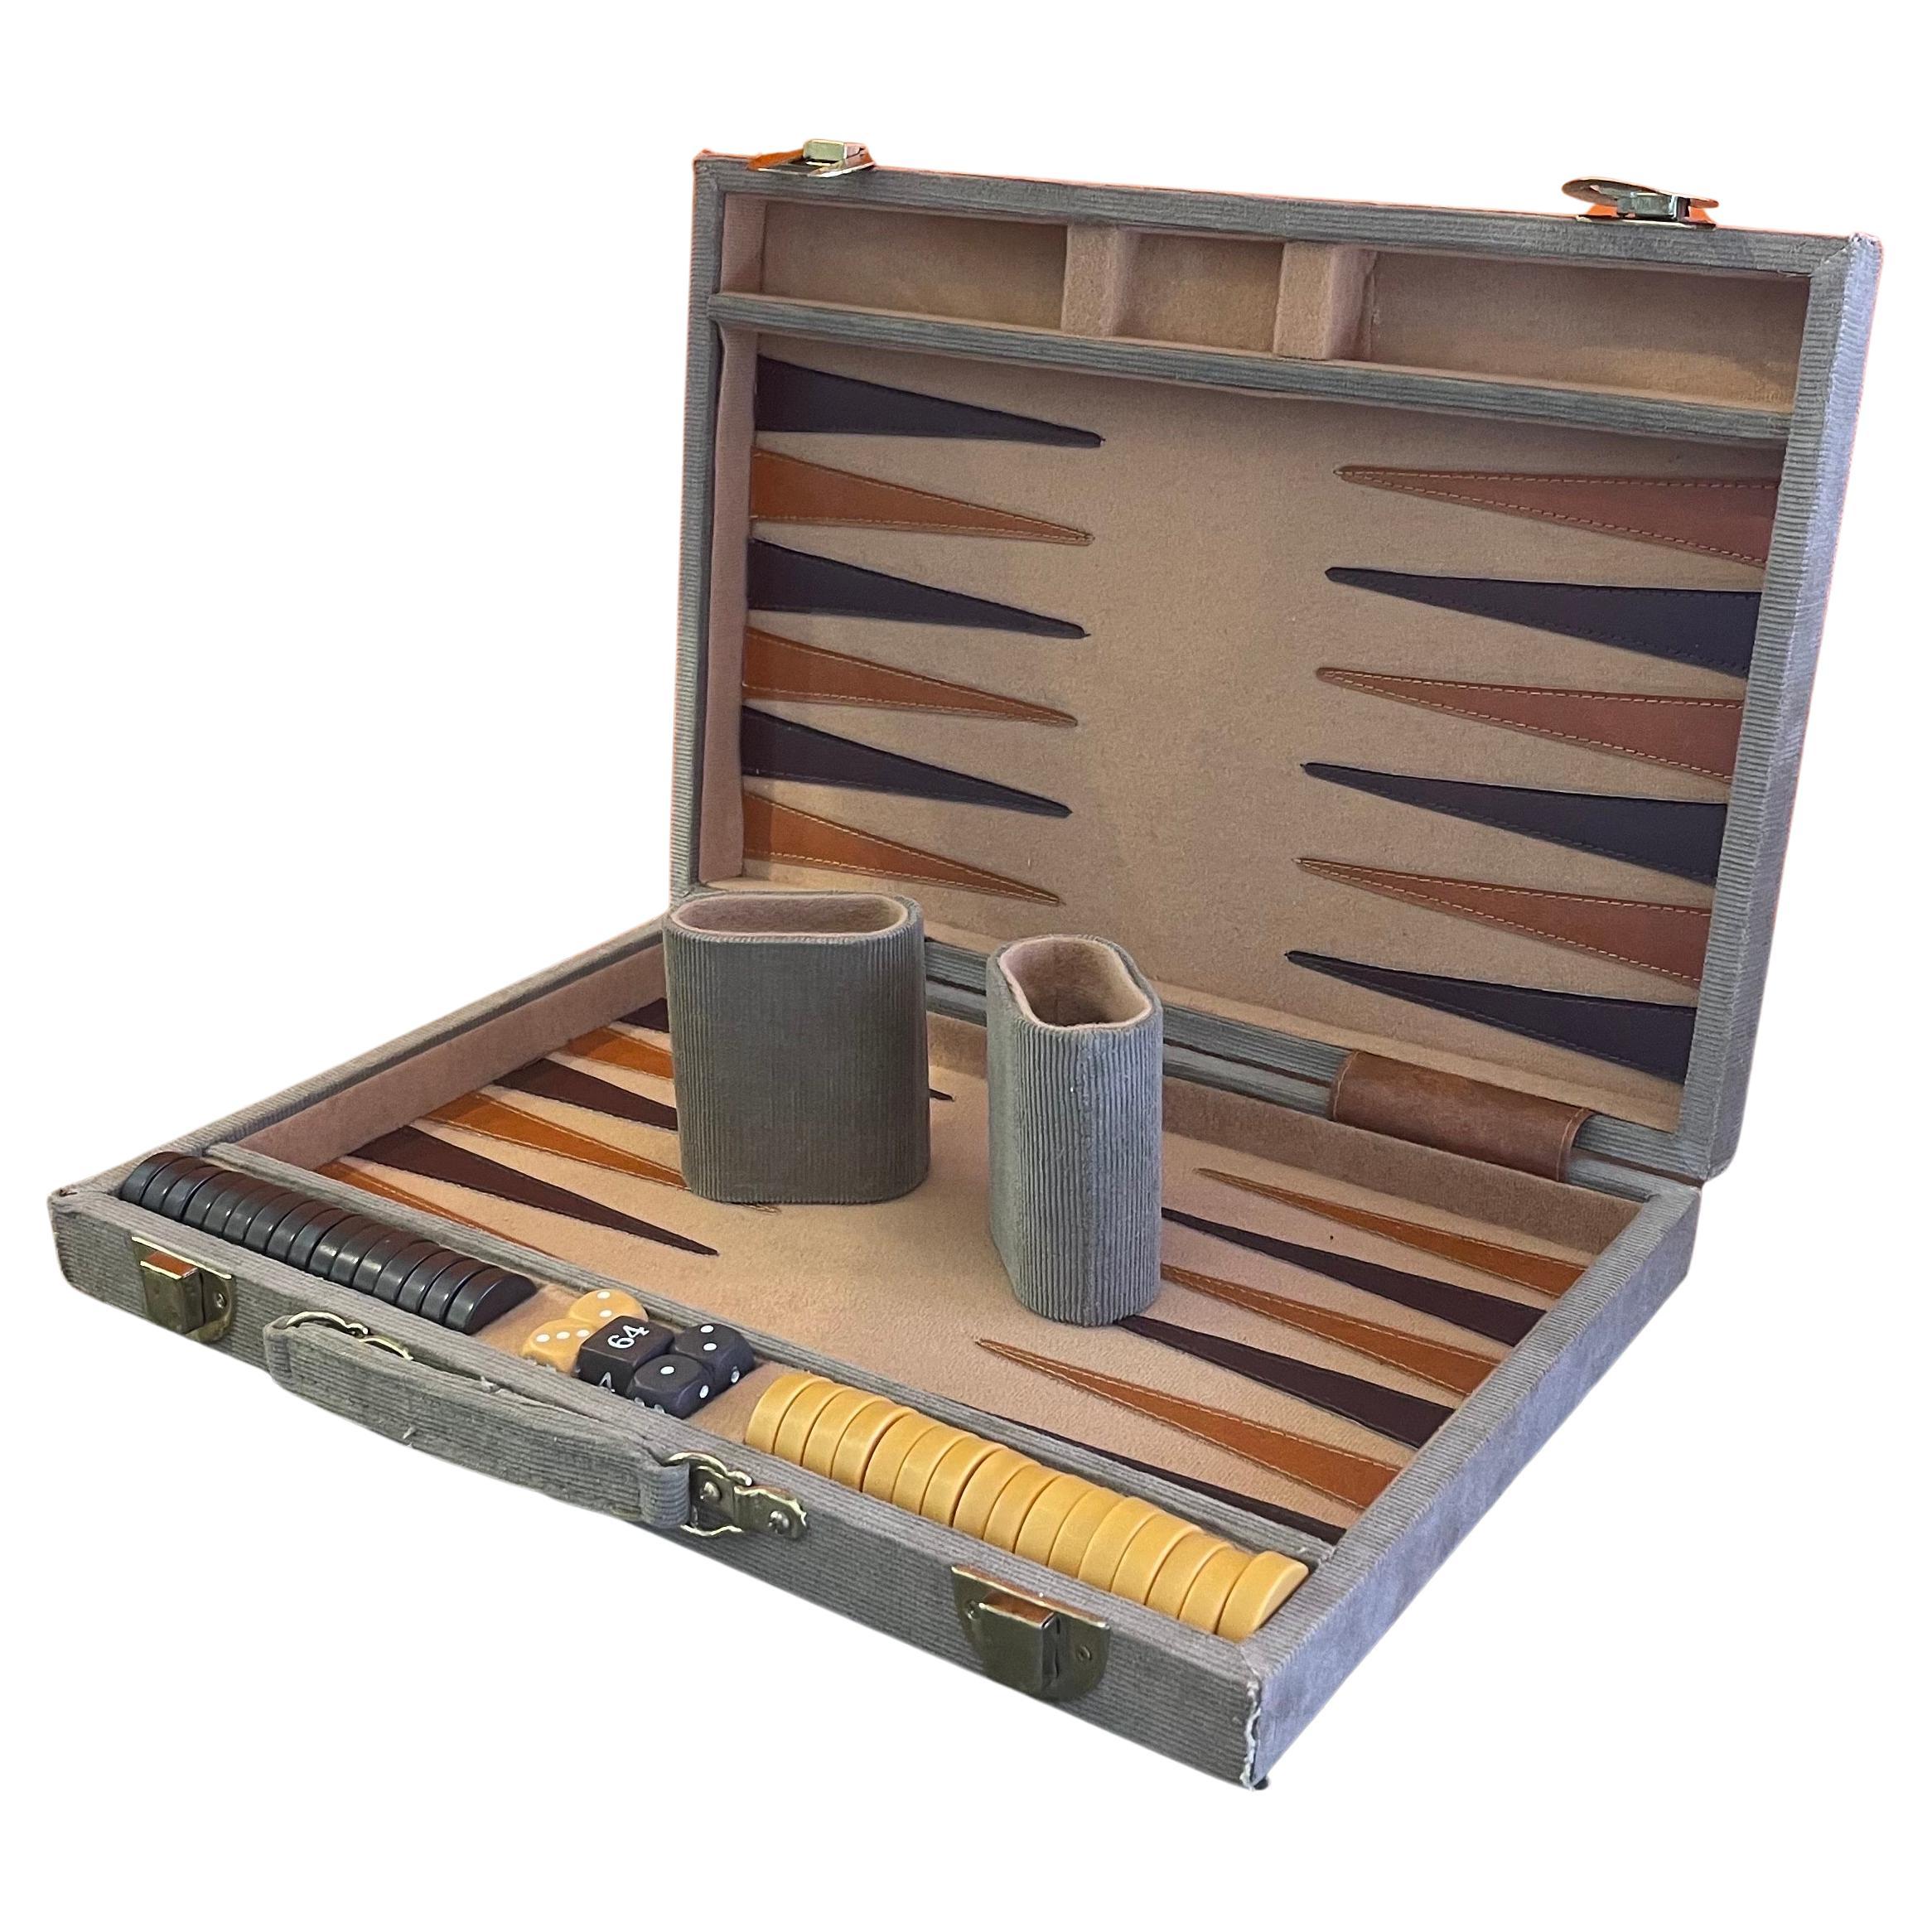 Vintage corduroy and bakelite backgammon set, circa 1970s. Set is complete with a foldable case / board with tan corduroy fabric, 32 (two extras) bakelite checkers (brown and tan in color, 1.125